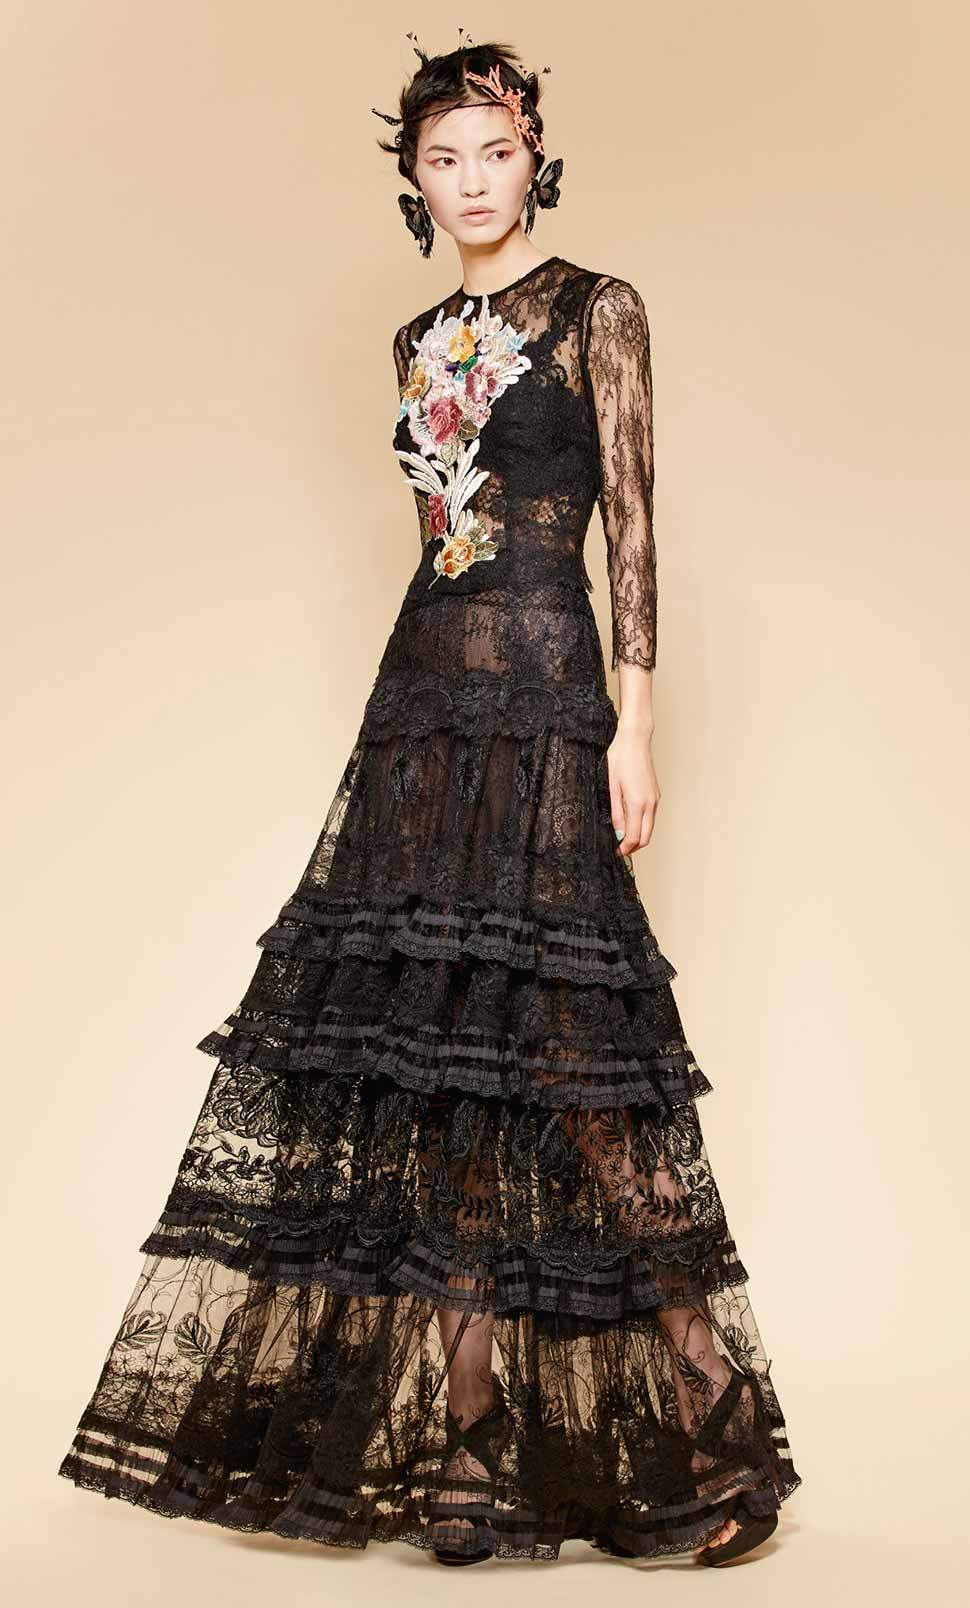 Black lace blouse with hand embroidered silk flowers in pastel shades over long black lace dress